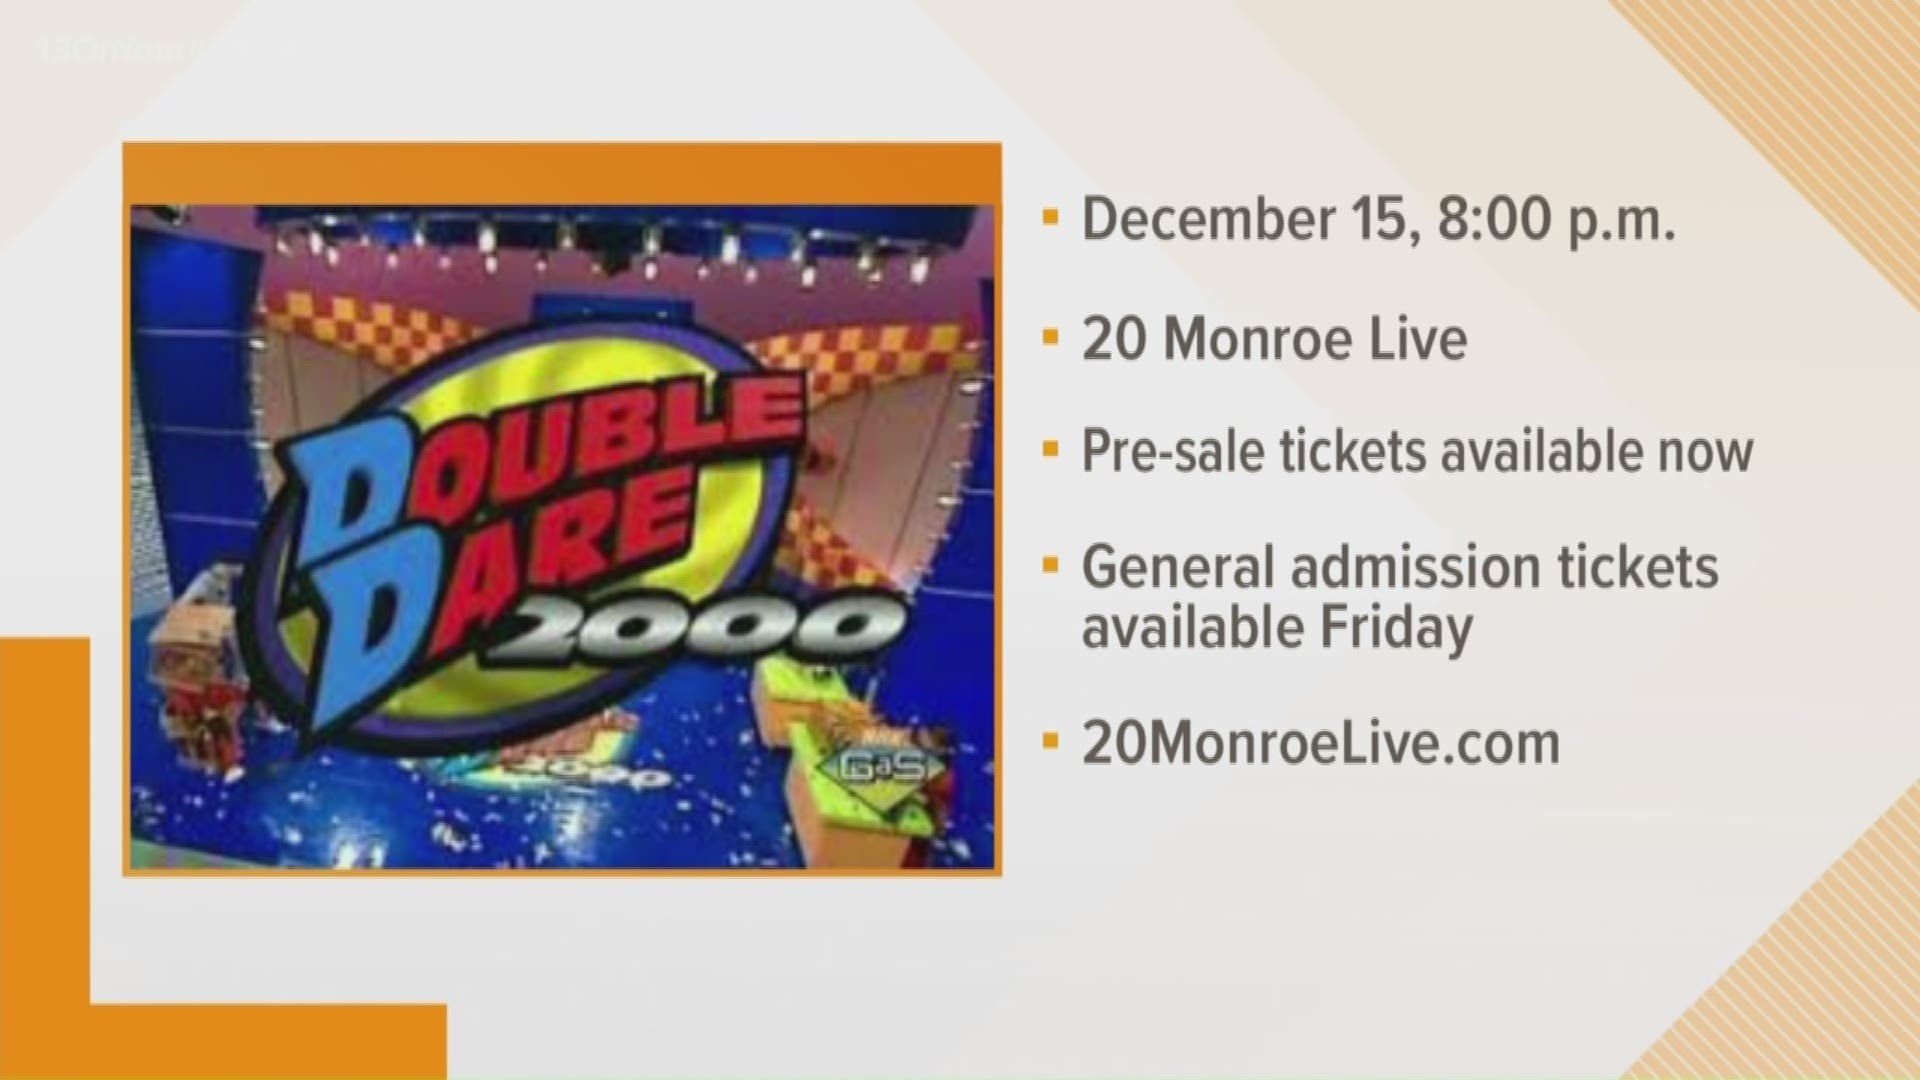 Nickelodeon's Double Dare is bring its live show to Grand Rapids in December.